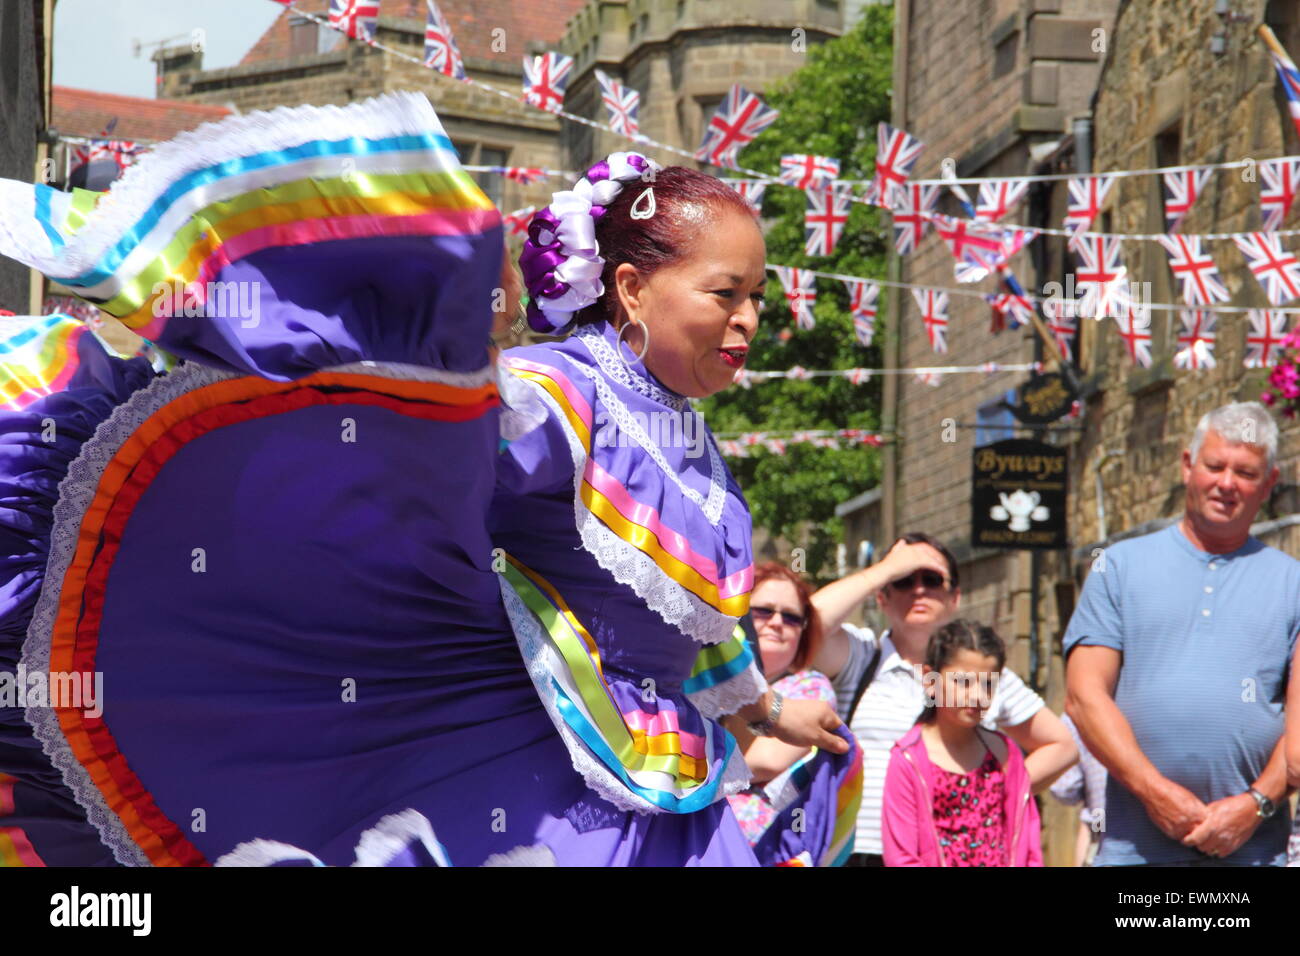 Mmbers of Son de America, a Latin American dance group perform outdoors at the Bakewell International Day of Dance, Bakewell UK Stock Photo